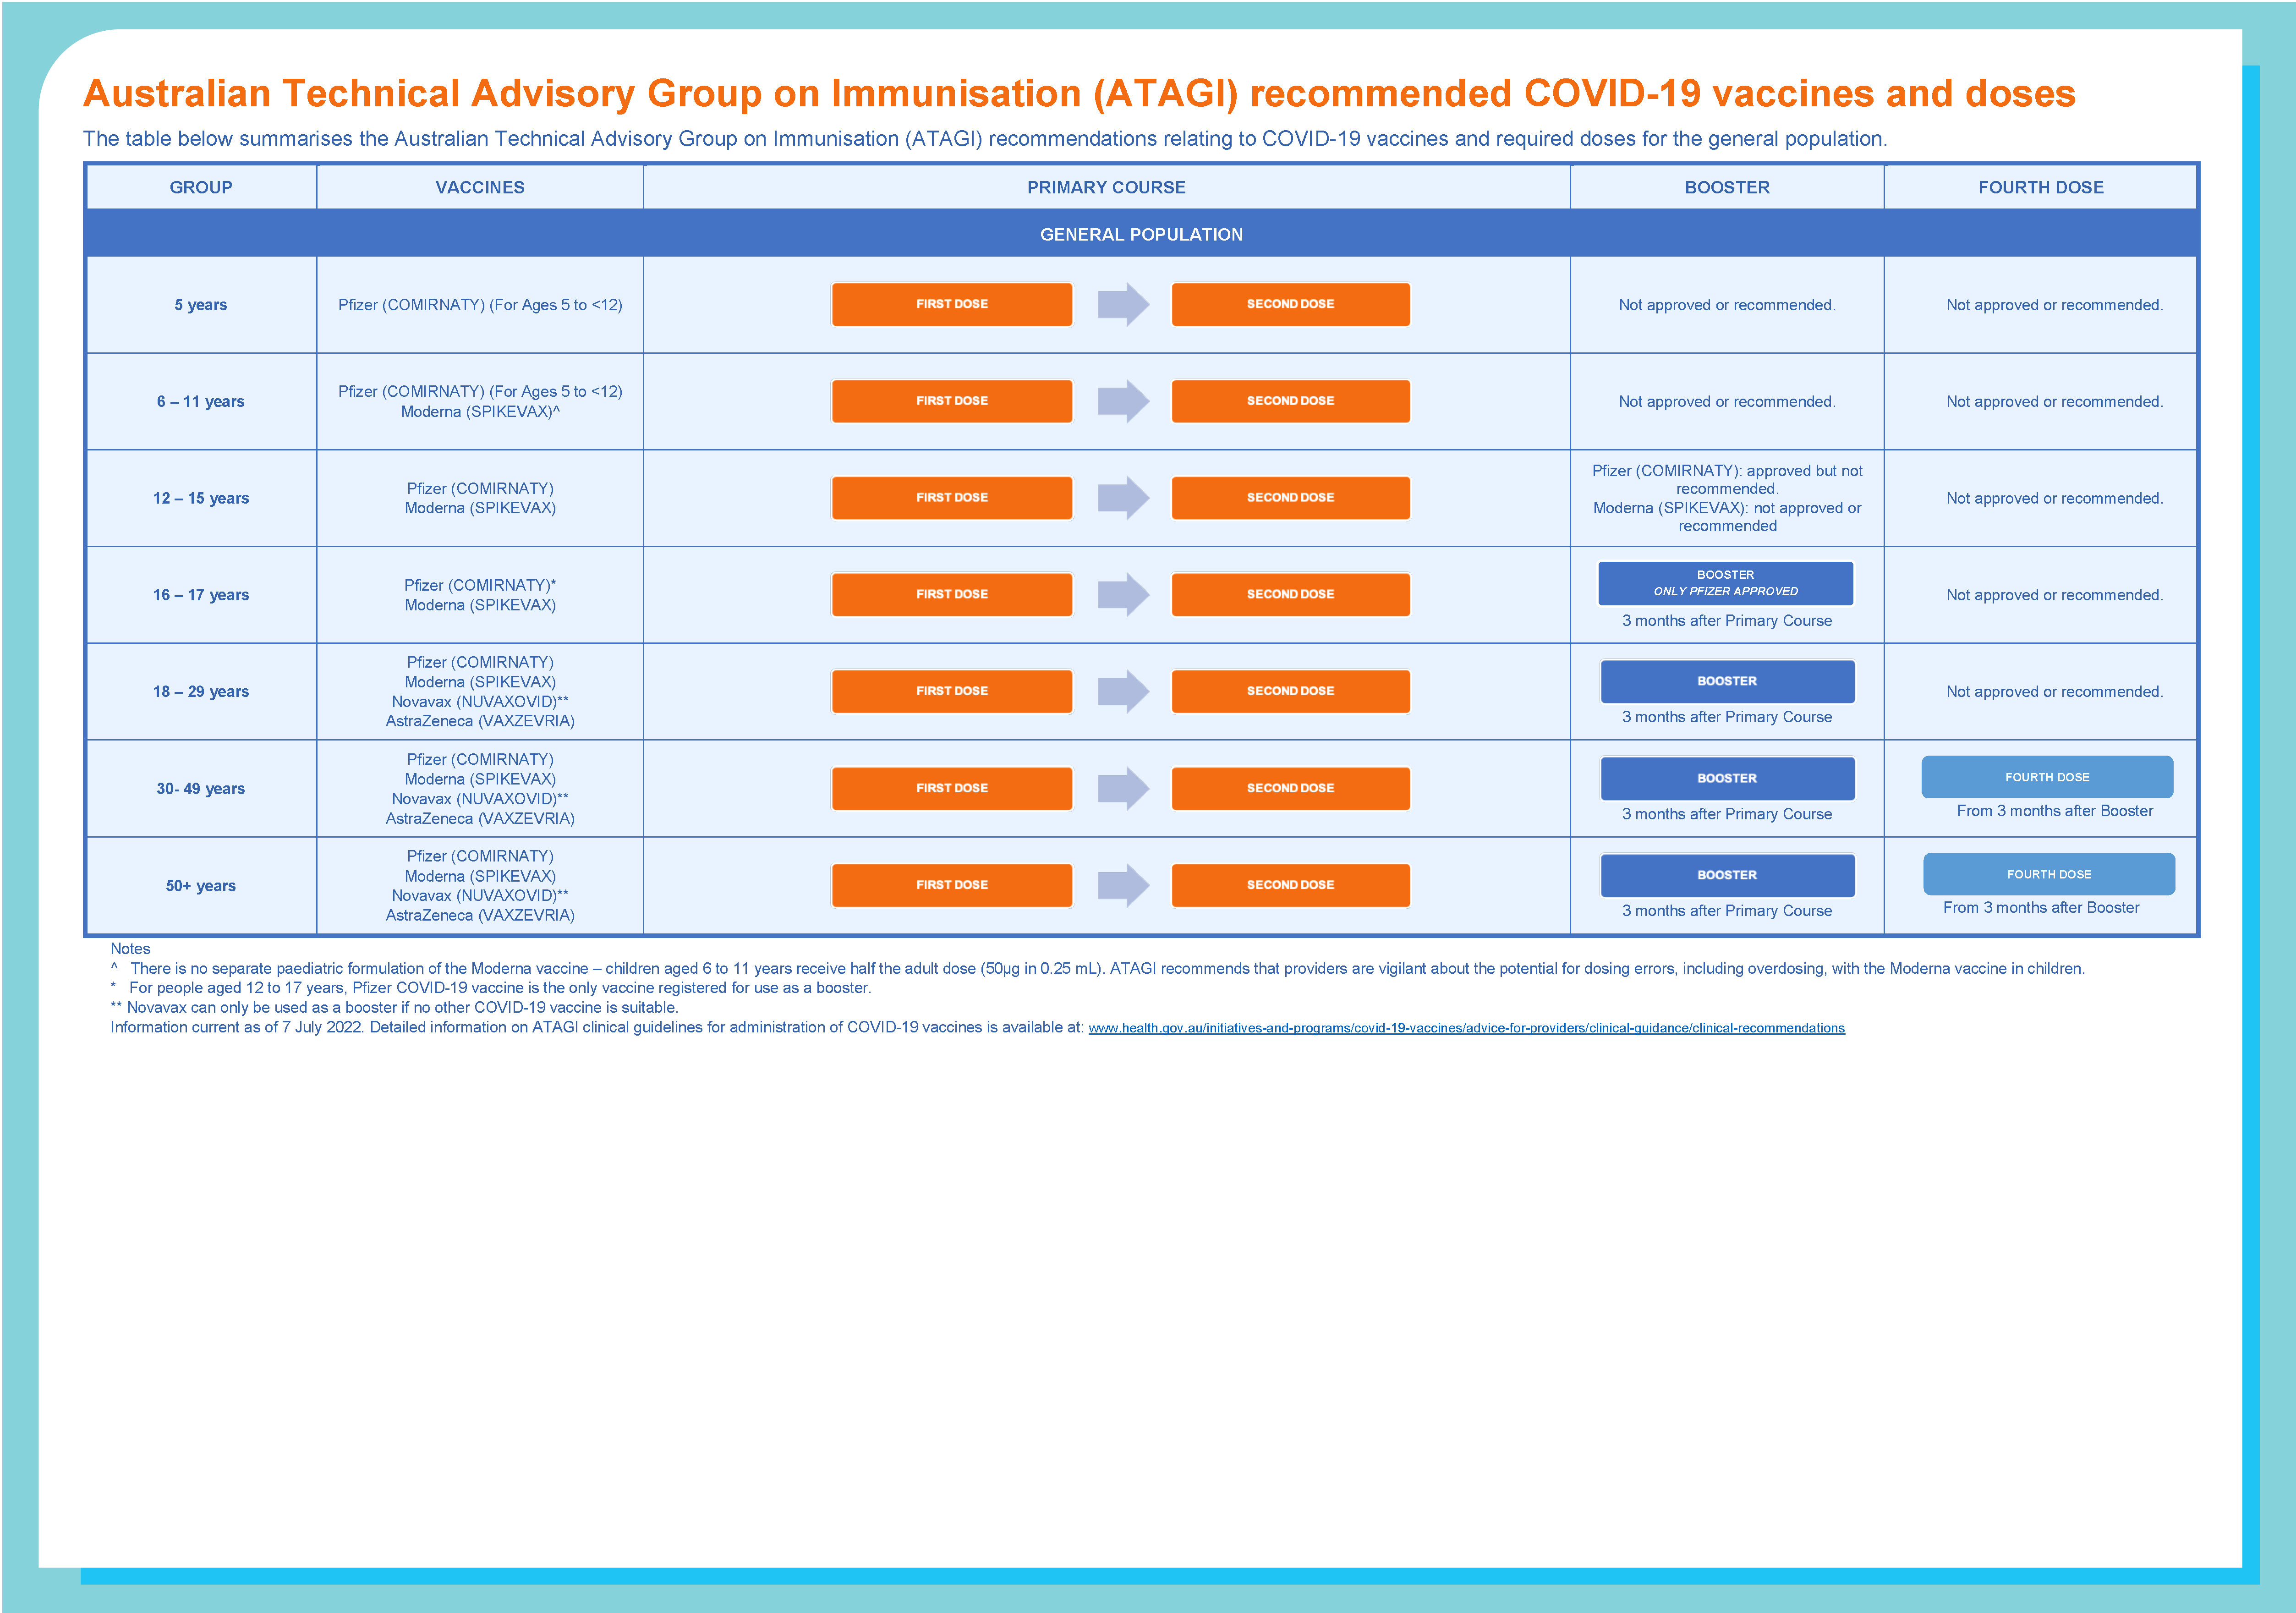 atagi recommended covid 19 doses and vaccines poster atagi recommended covid 19 doses and vaccines 